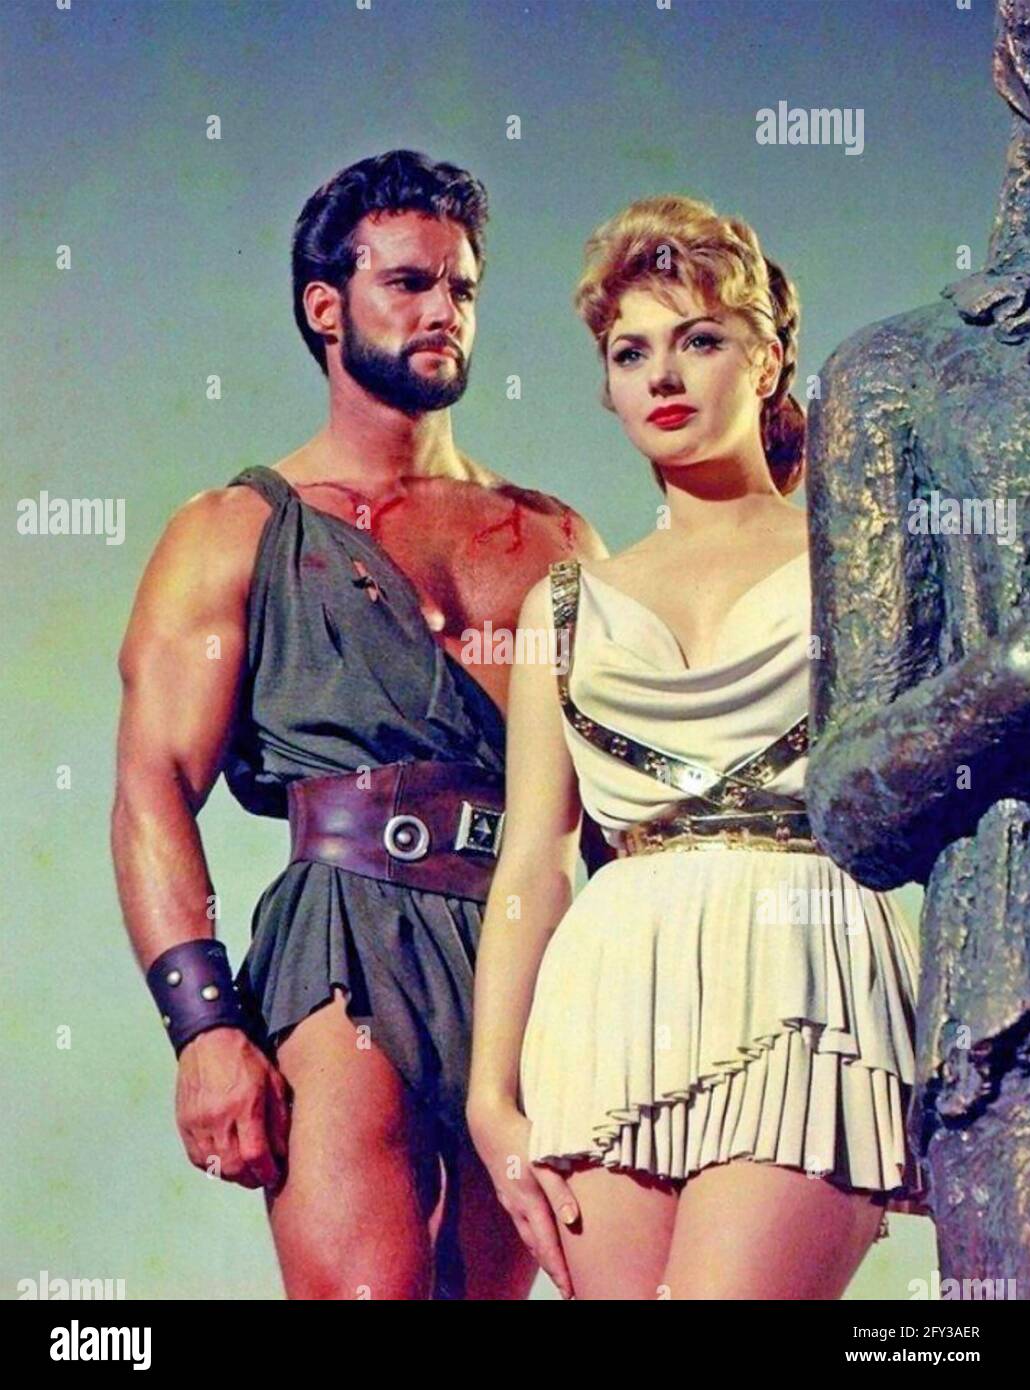 HERCULES UNCHAINED (aka Hercules and the Queen of Lydia) 1959 Warner Bros. film with Steve Reeves and Sylva Koscina Stock Photo